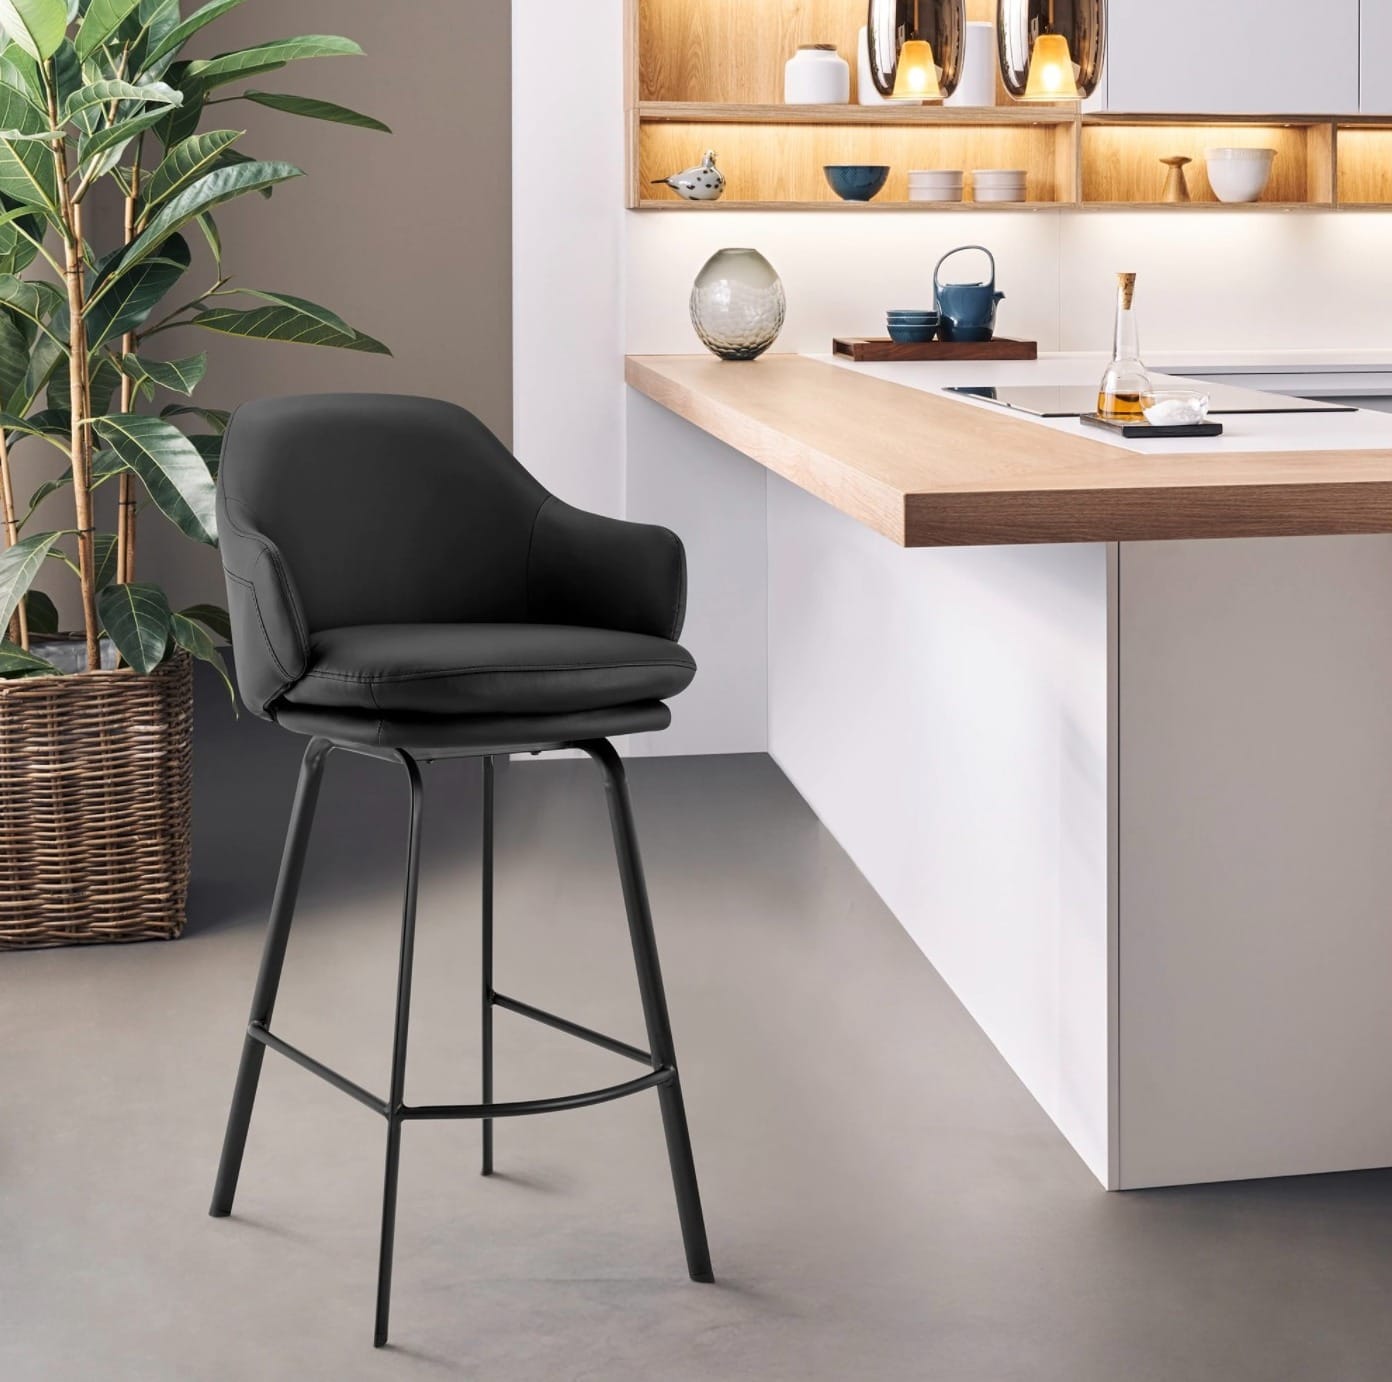 Add Some Luxury with these Faux Leather Counter Stools with Backs